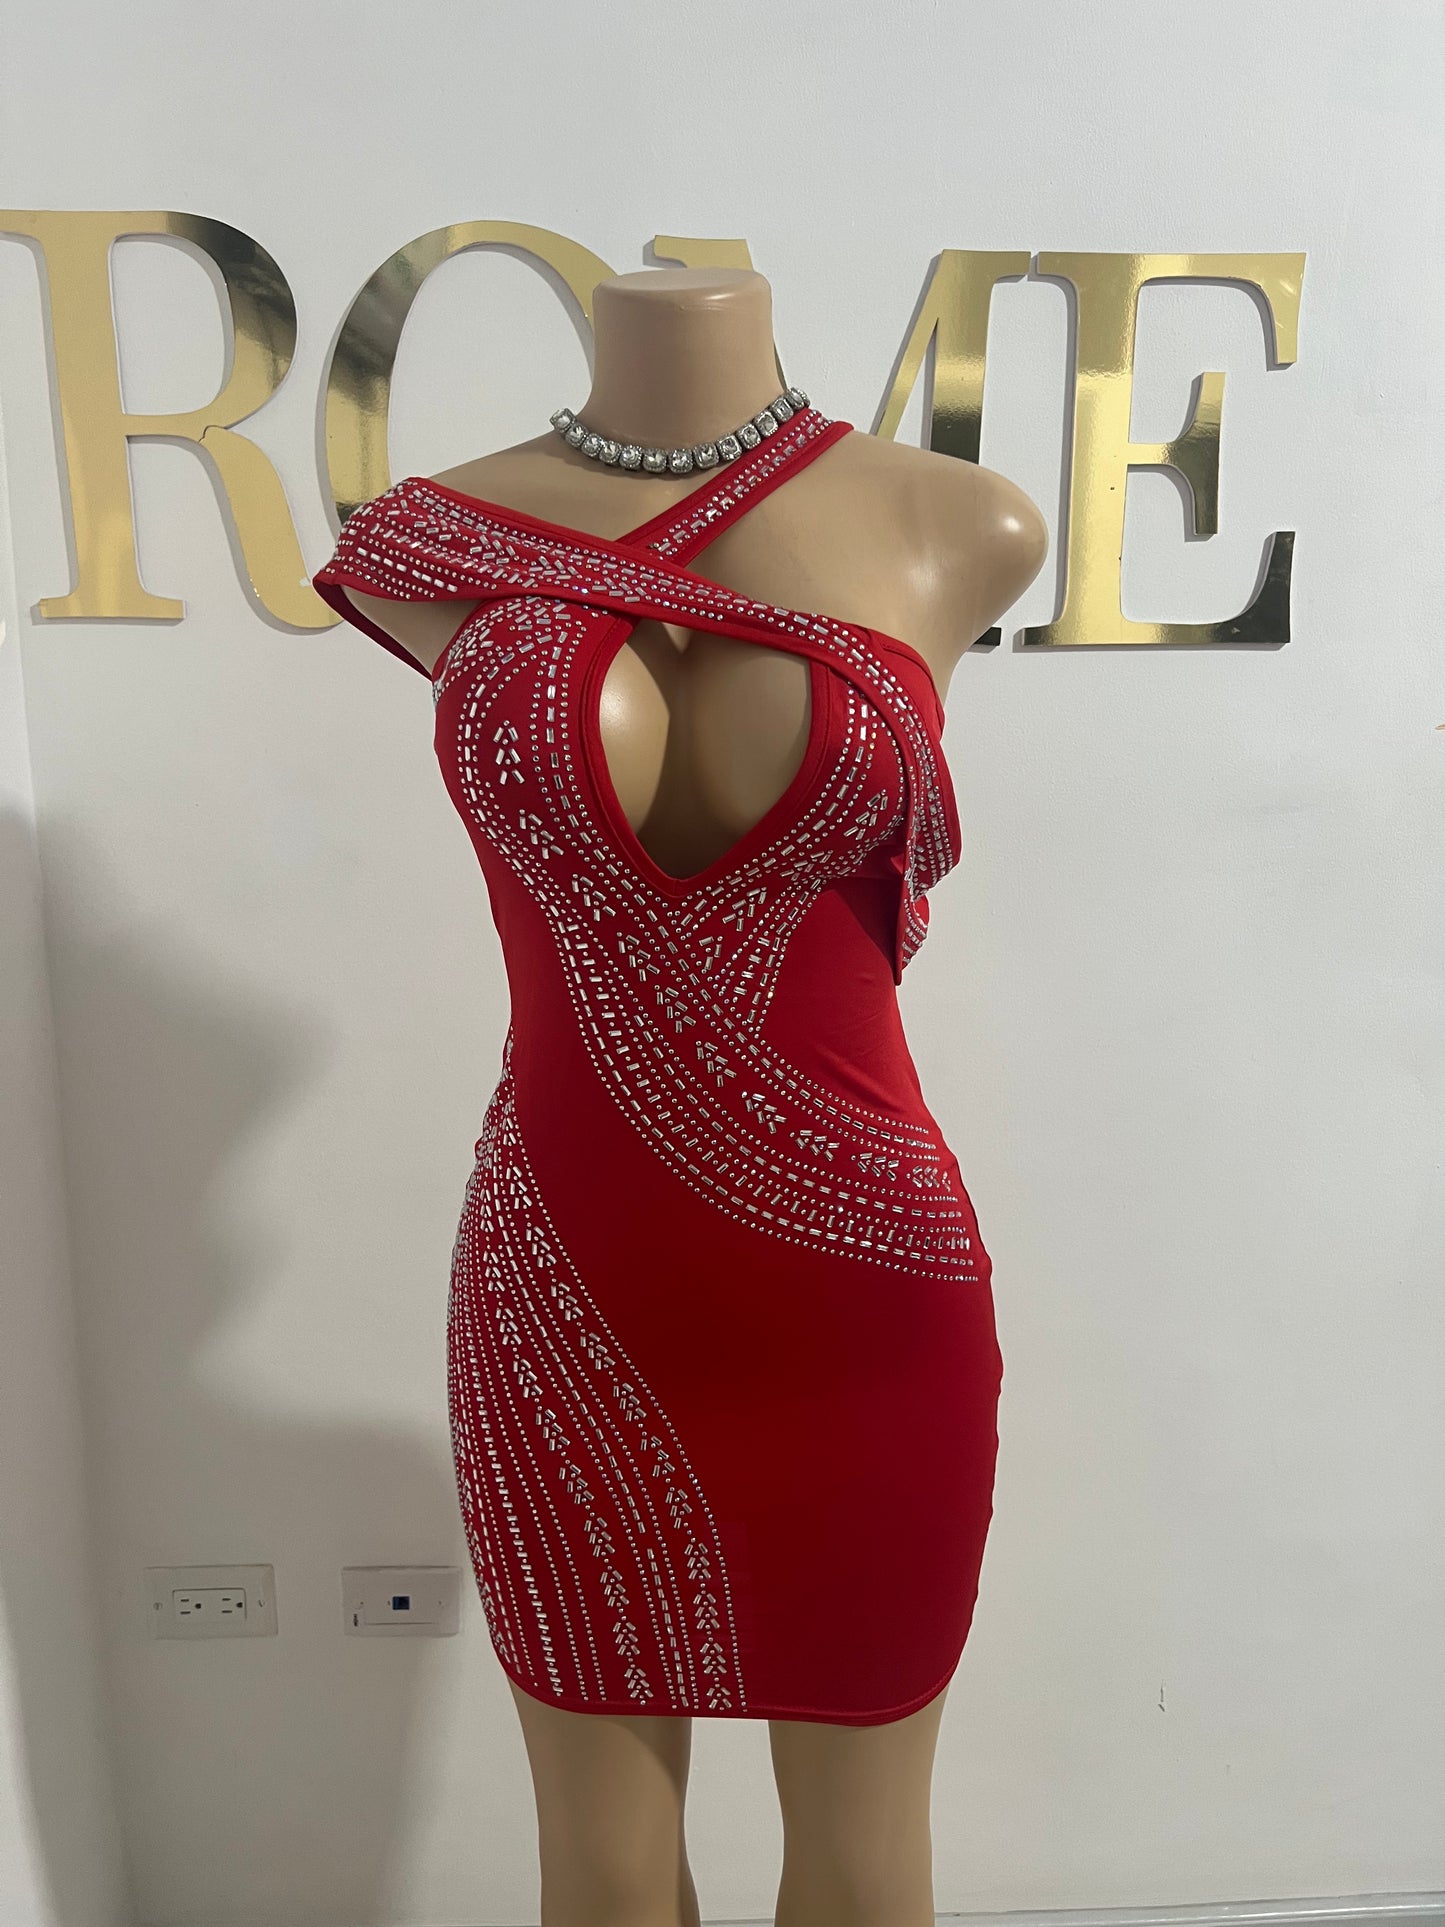 Ariel Colorful Crystal Dress (Red)